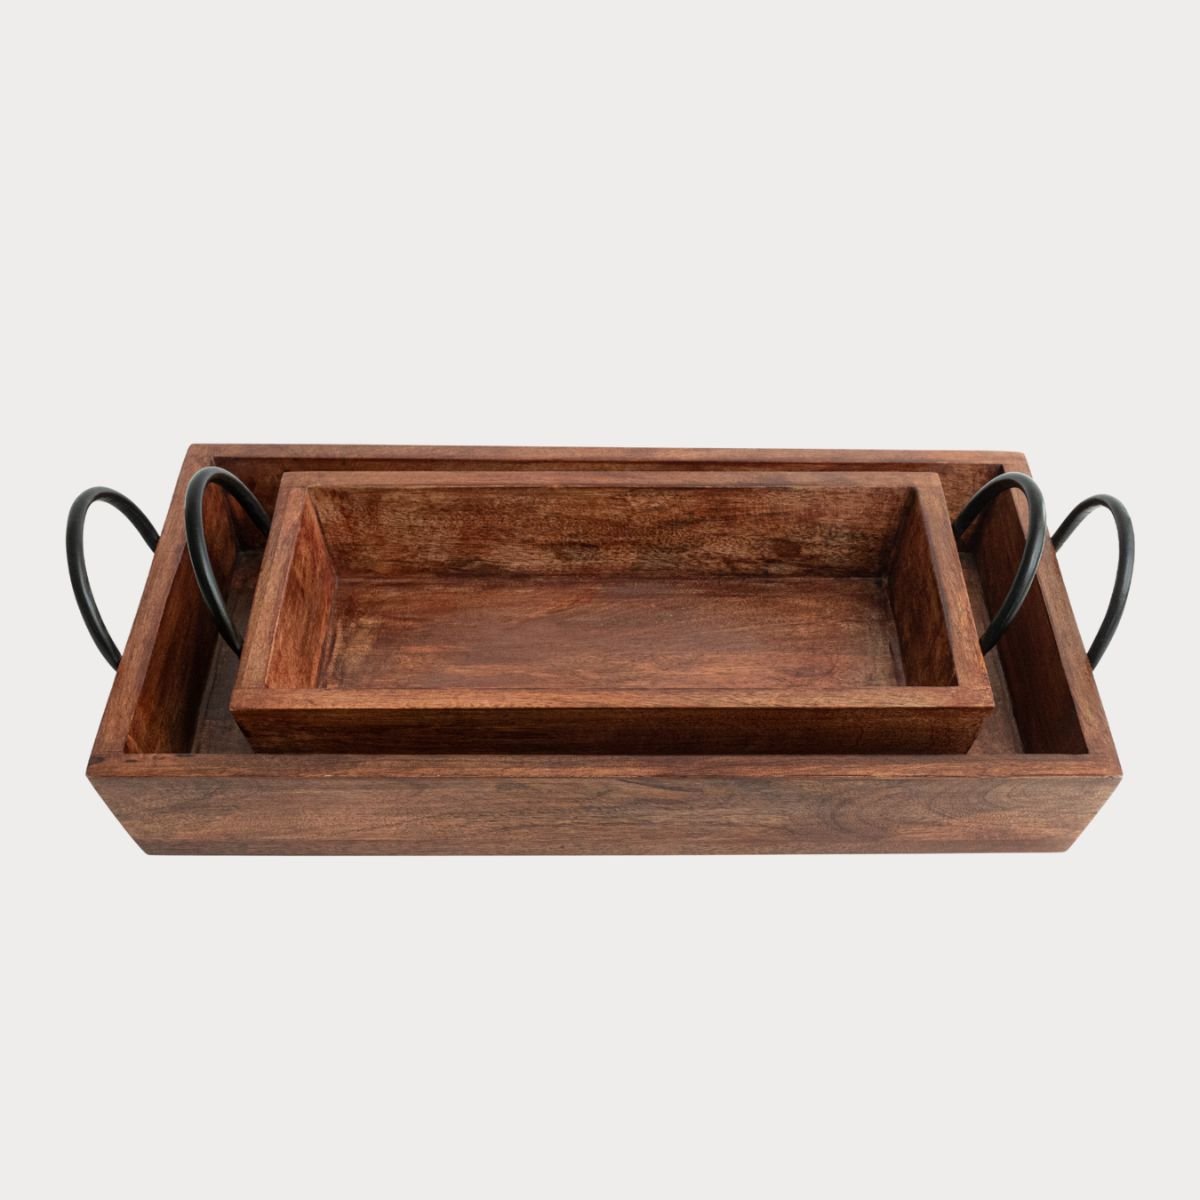 Rectangular Wooden Serving Trays with Black Metal Handles, Set of 2, front image - Aesthetic Living